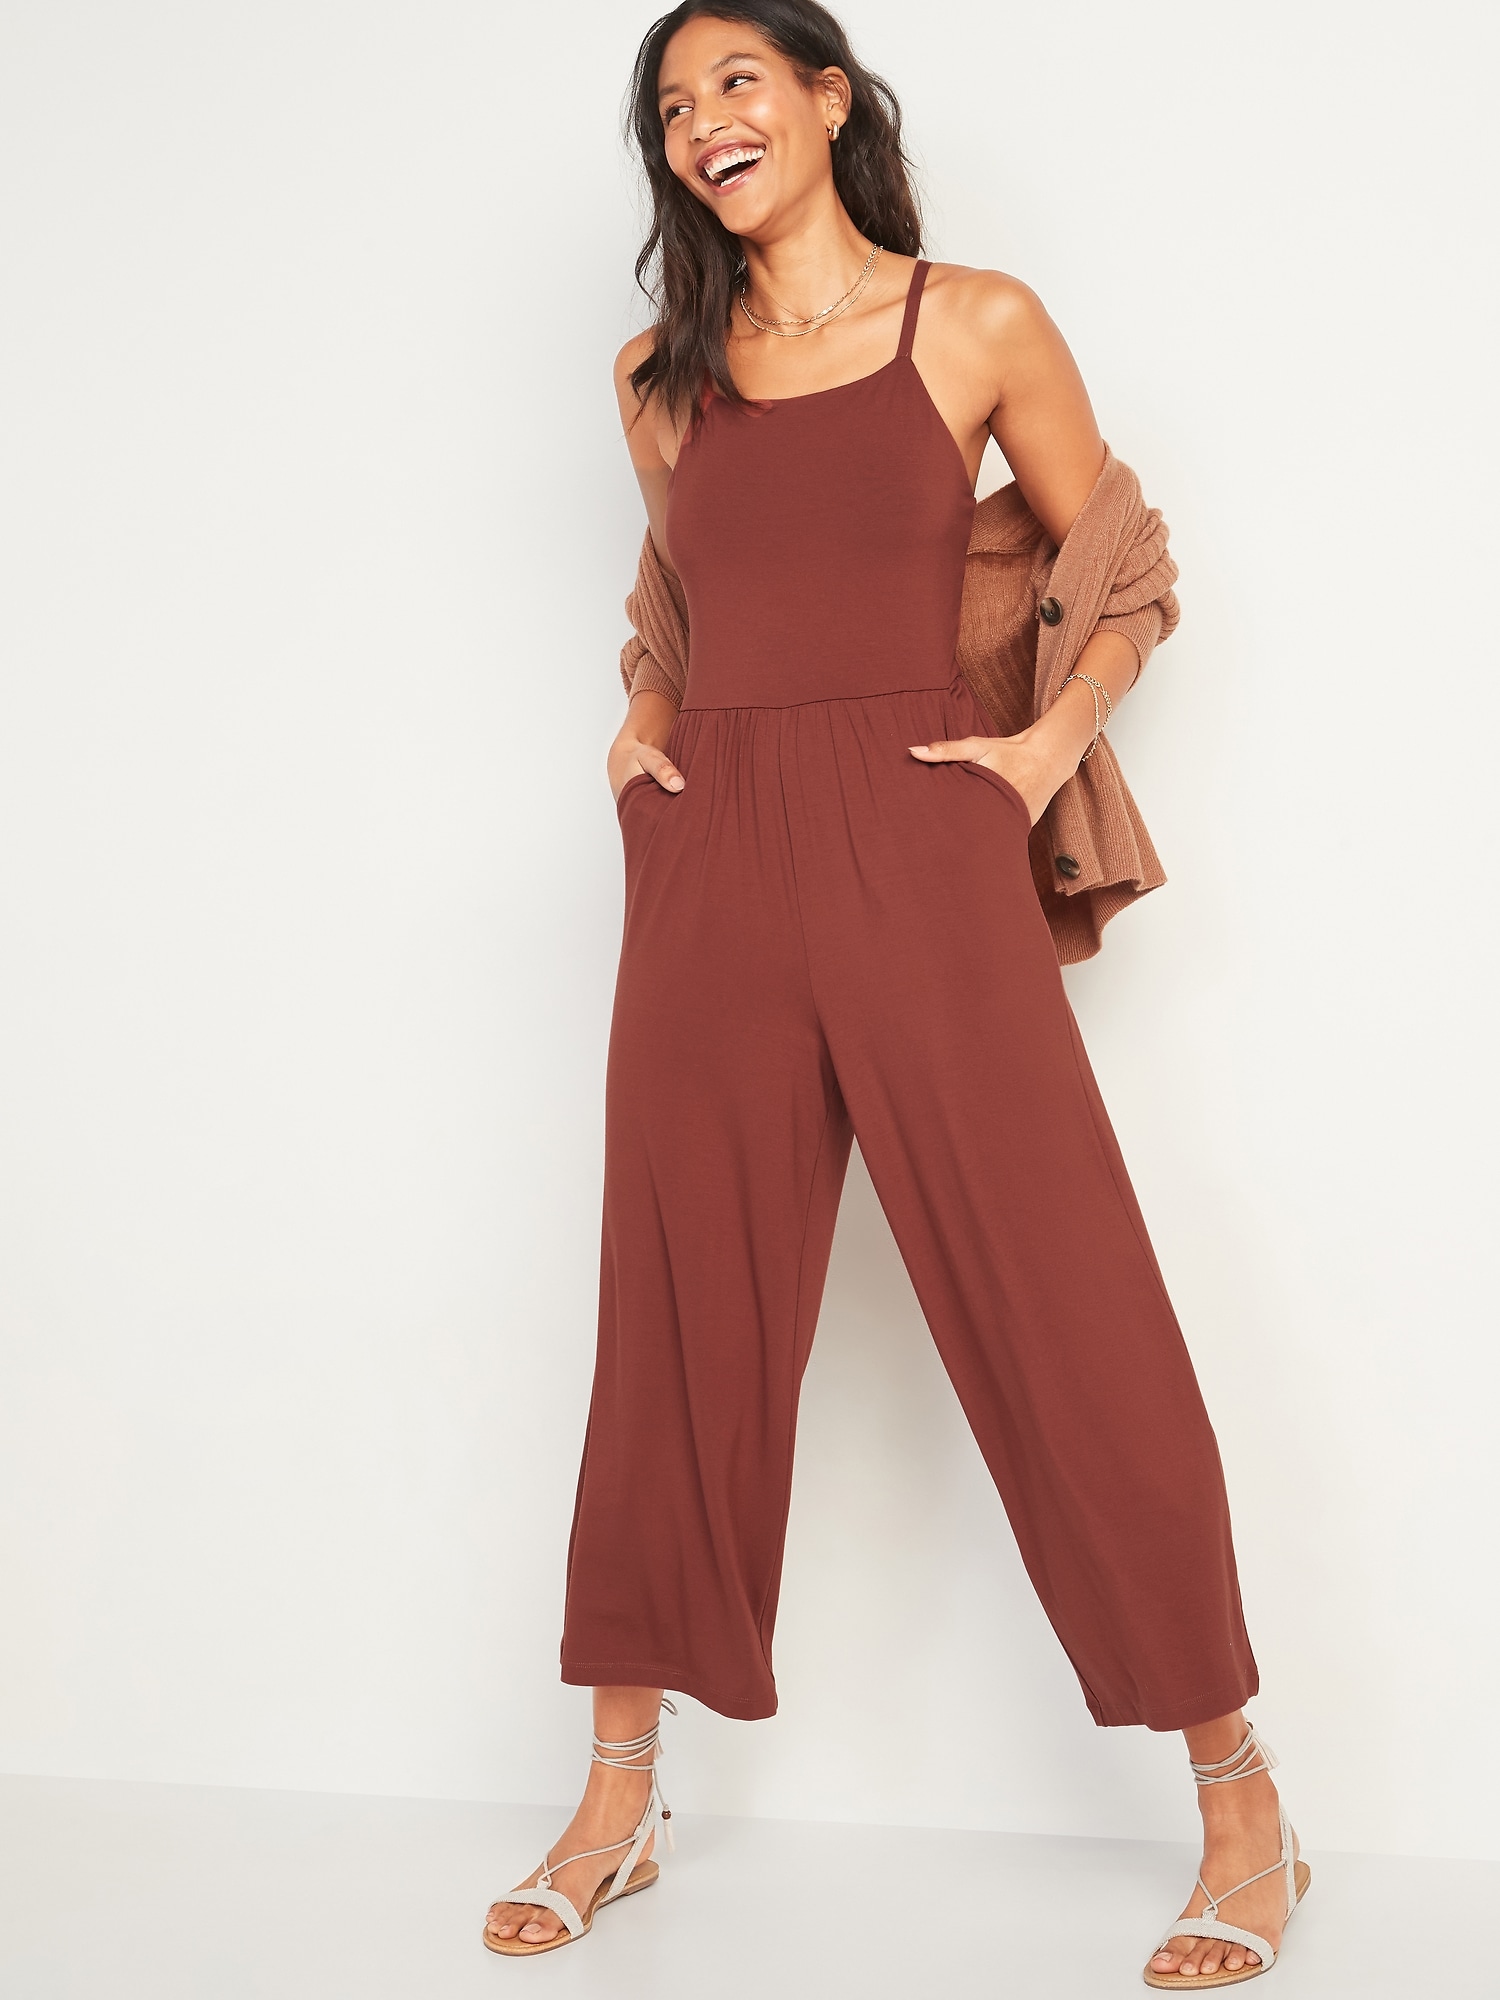 Sleeveless Jersey-Knit Cami Jumpsuit for Women